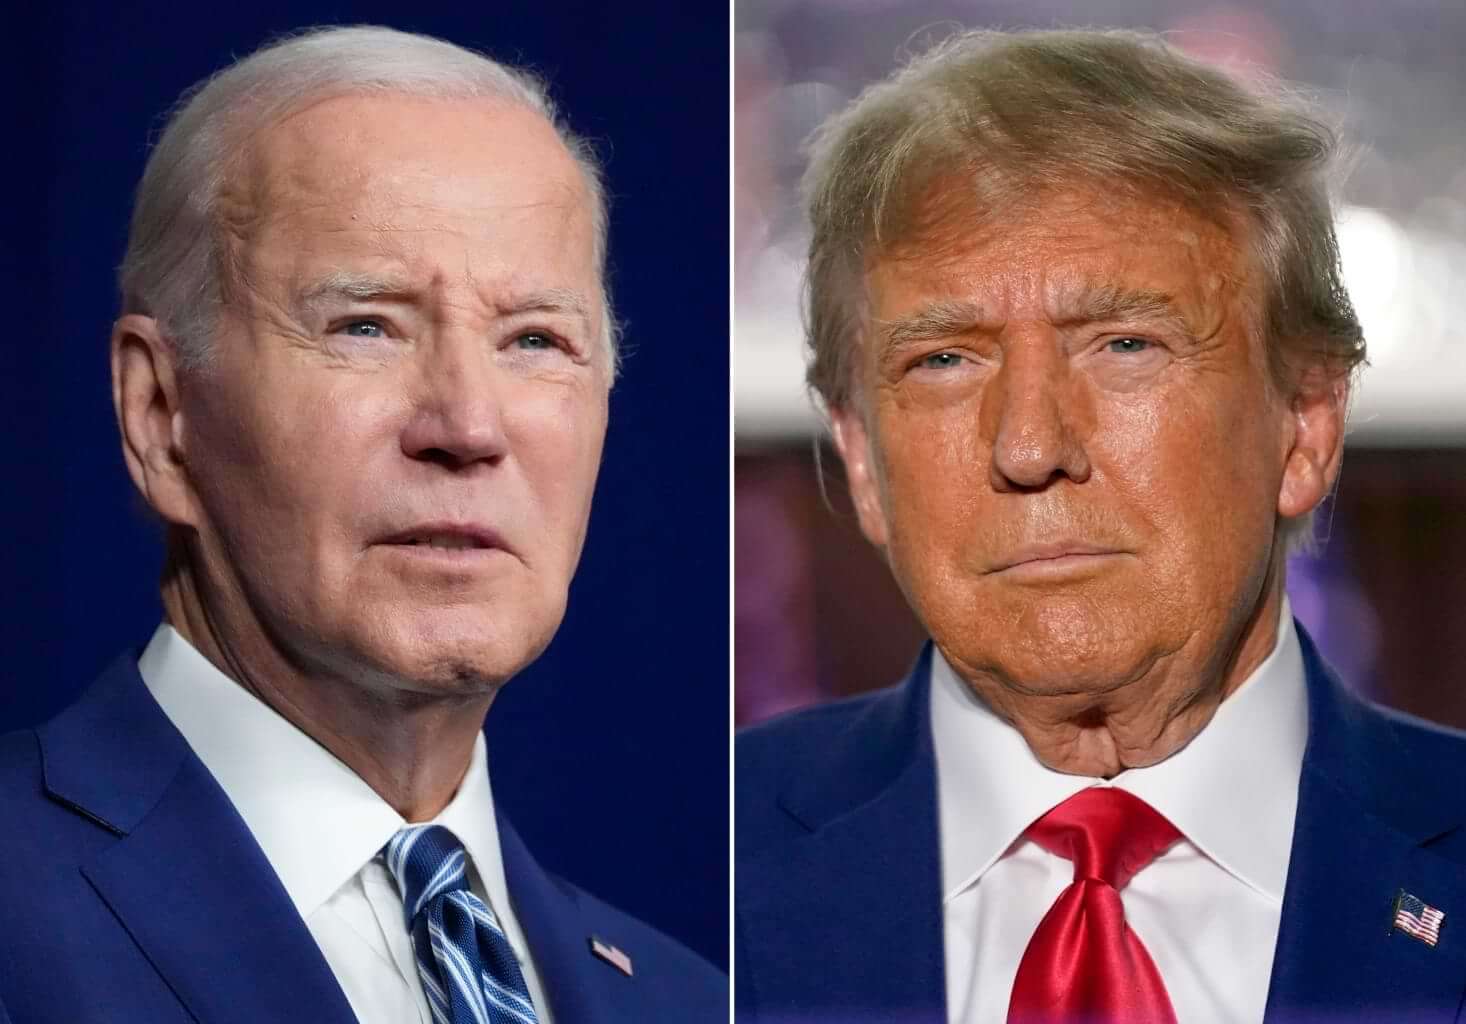 A majority of Americans say Biden and Trump are too old to serve second terms